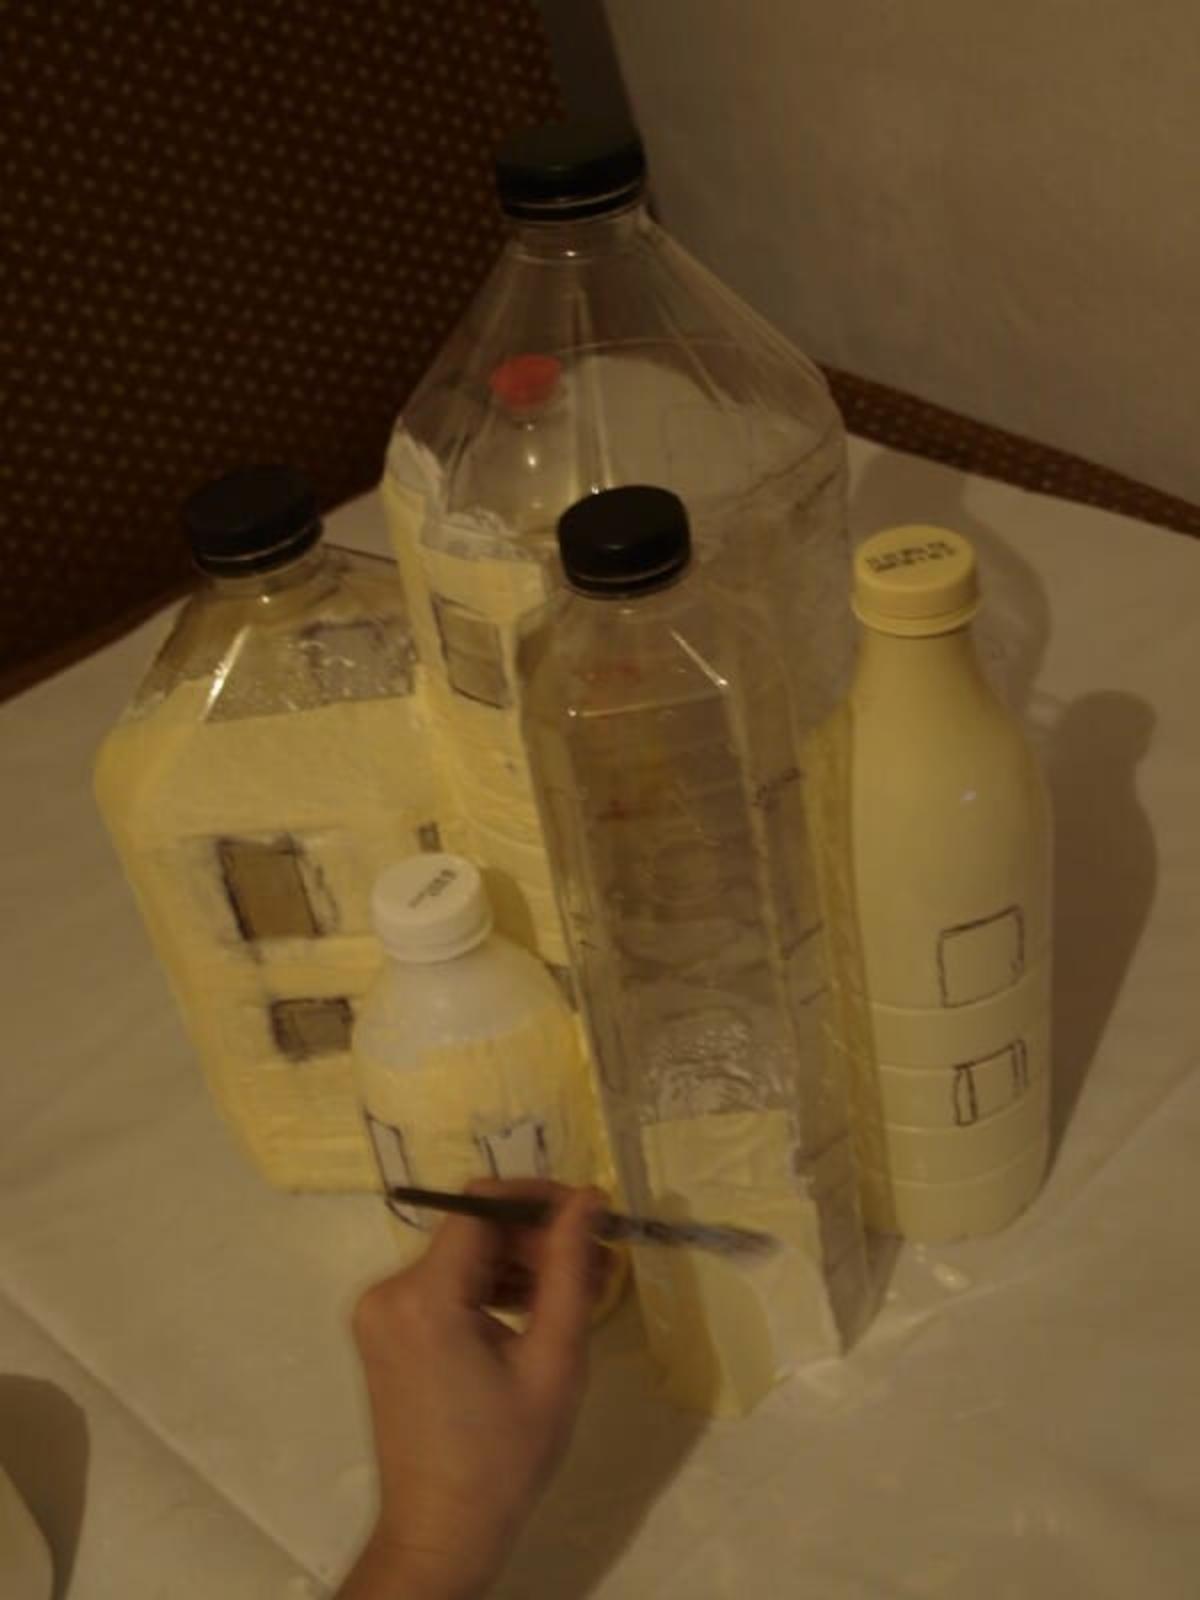 Covering bottles in wood glue and paper towels